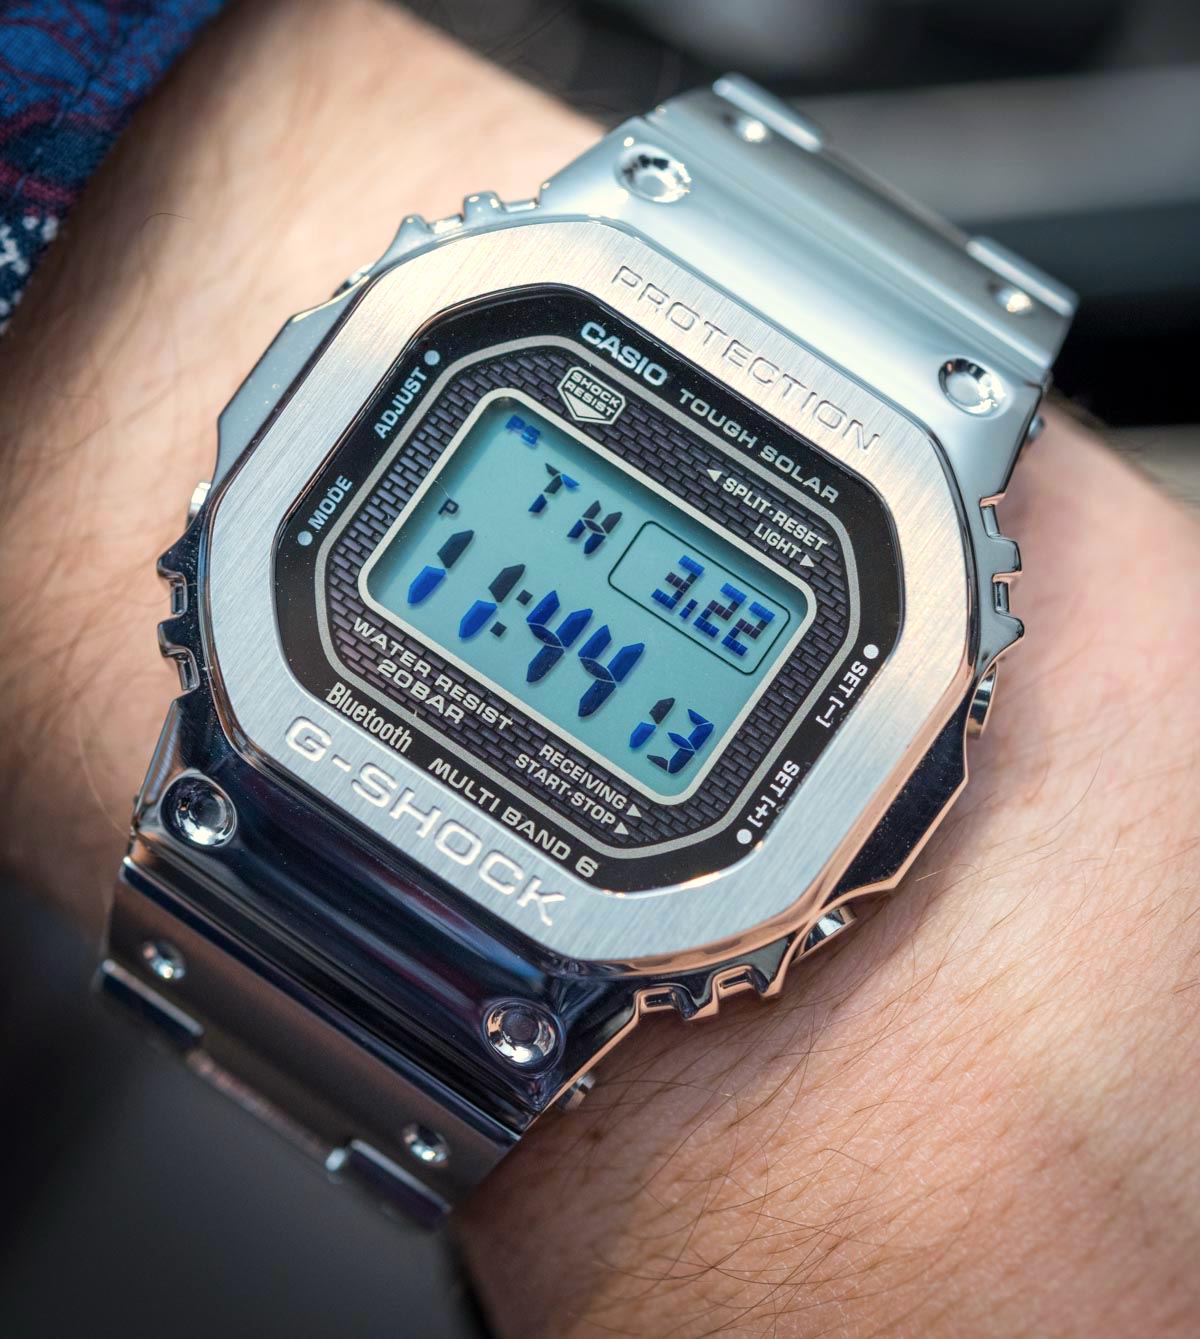 Hands-On With The Casio G-Shock GMW-B 5000 D-1 'Full Metal ...